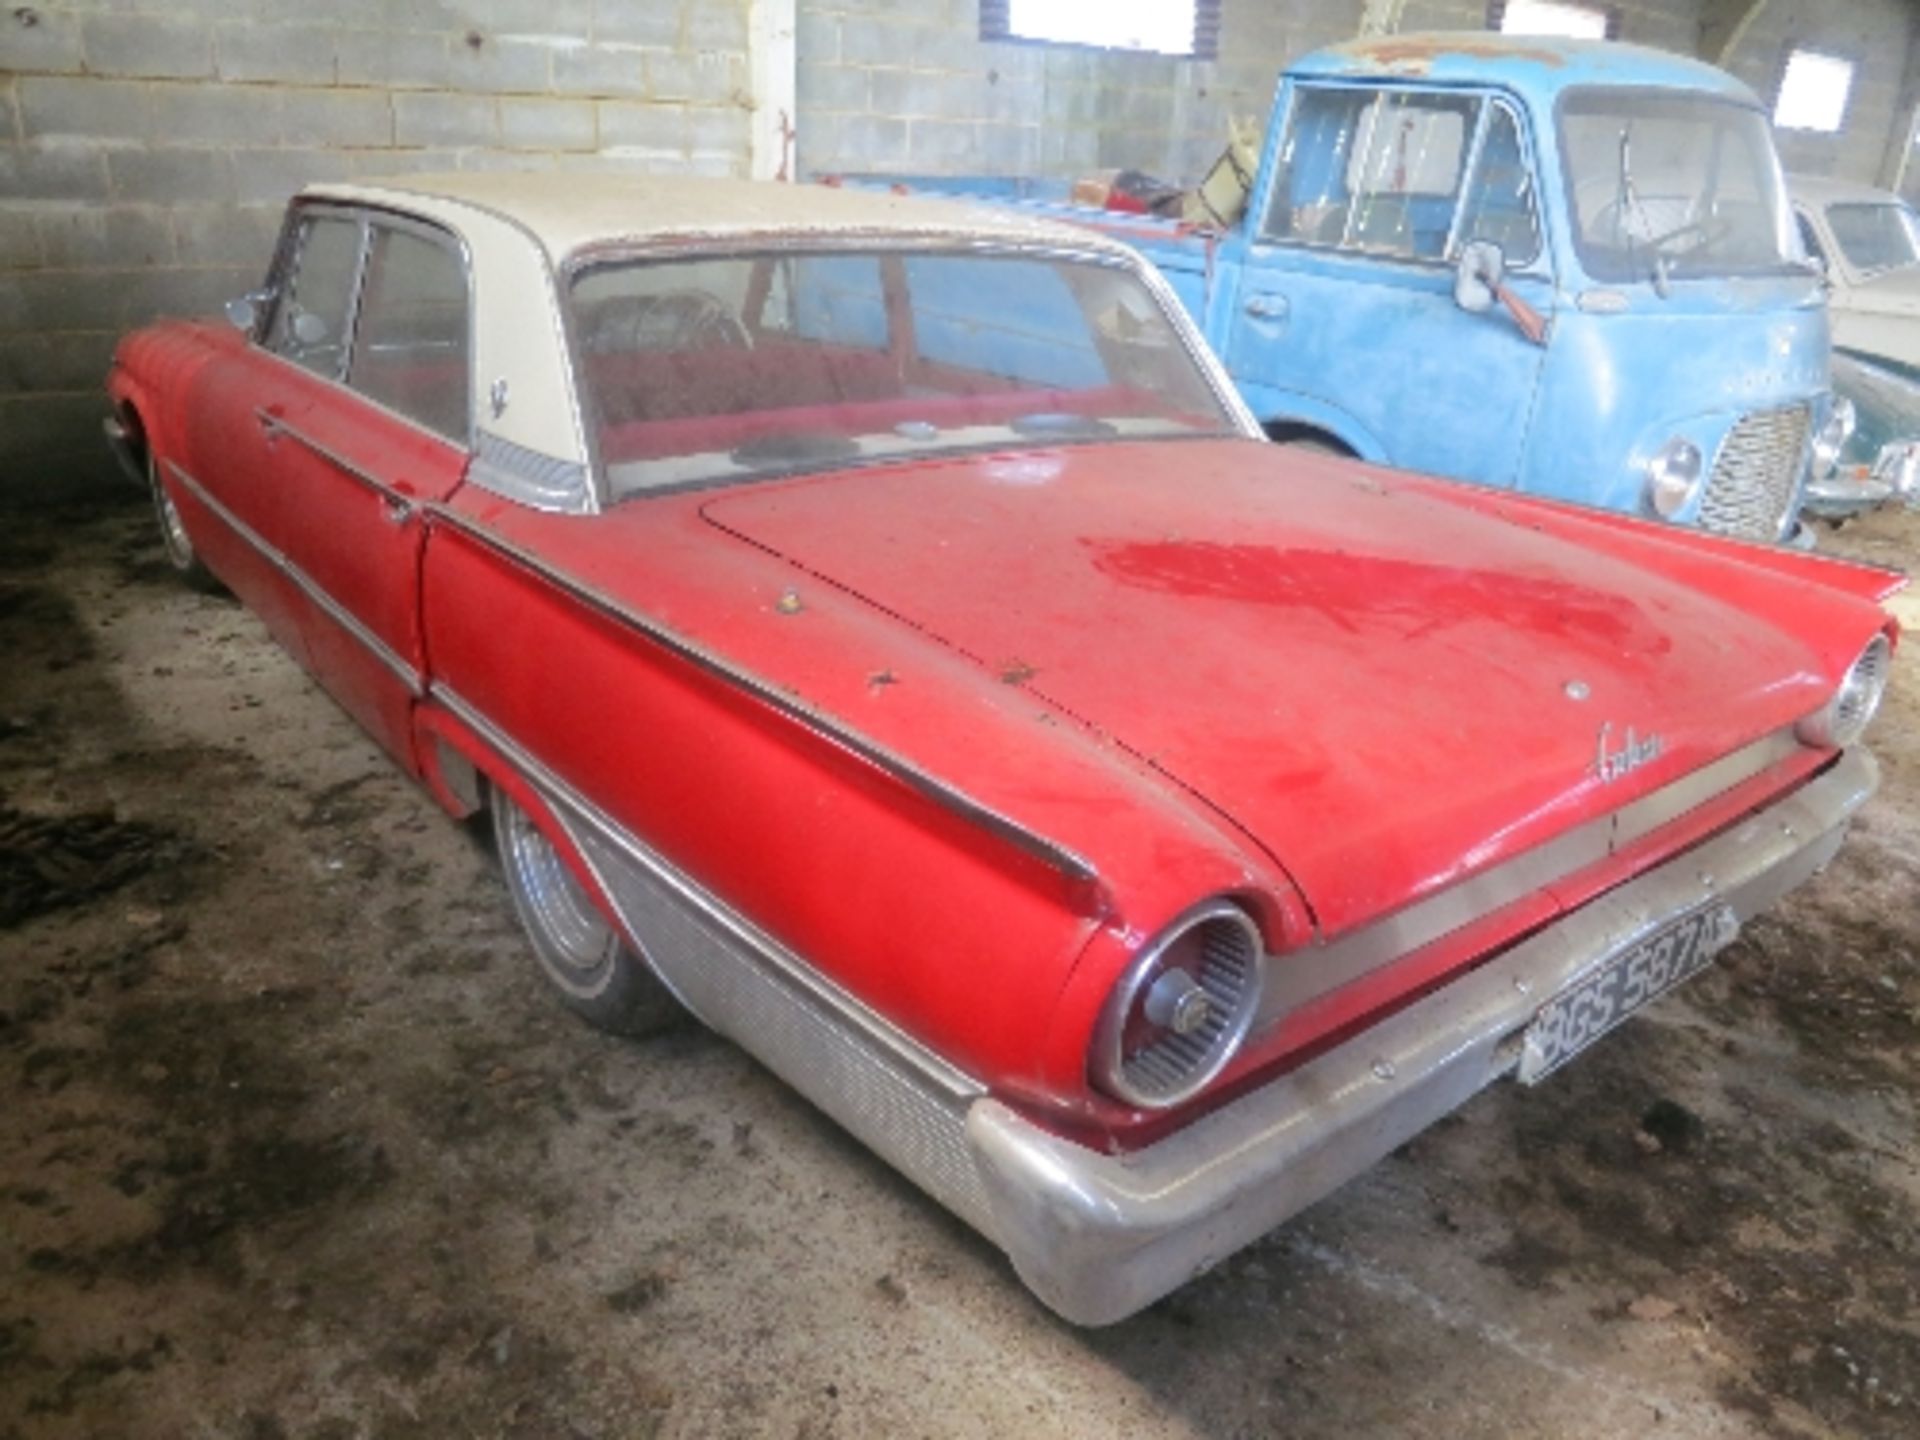 FORD GALAXIE 4 DOOR SALOON (RIGHT HAND RIVE) Registration Number: BGS 587A - 1962 - V5 - MOT expired - Image 2 of 2